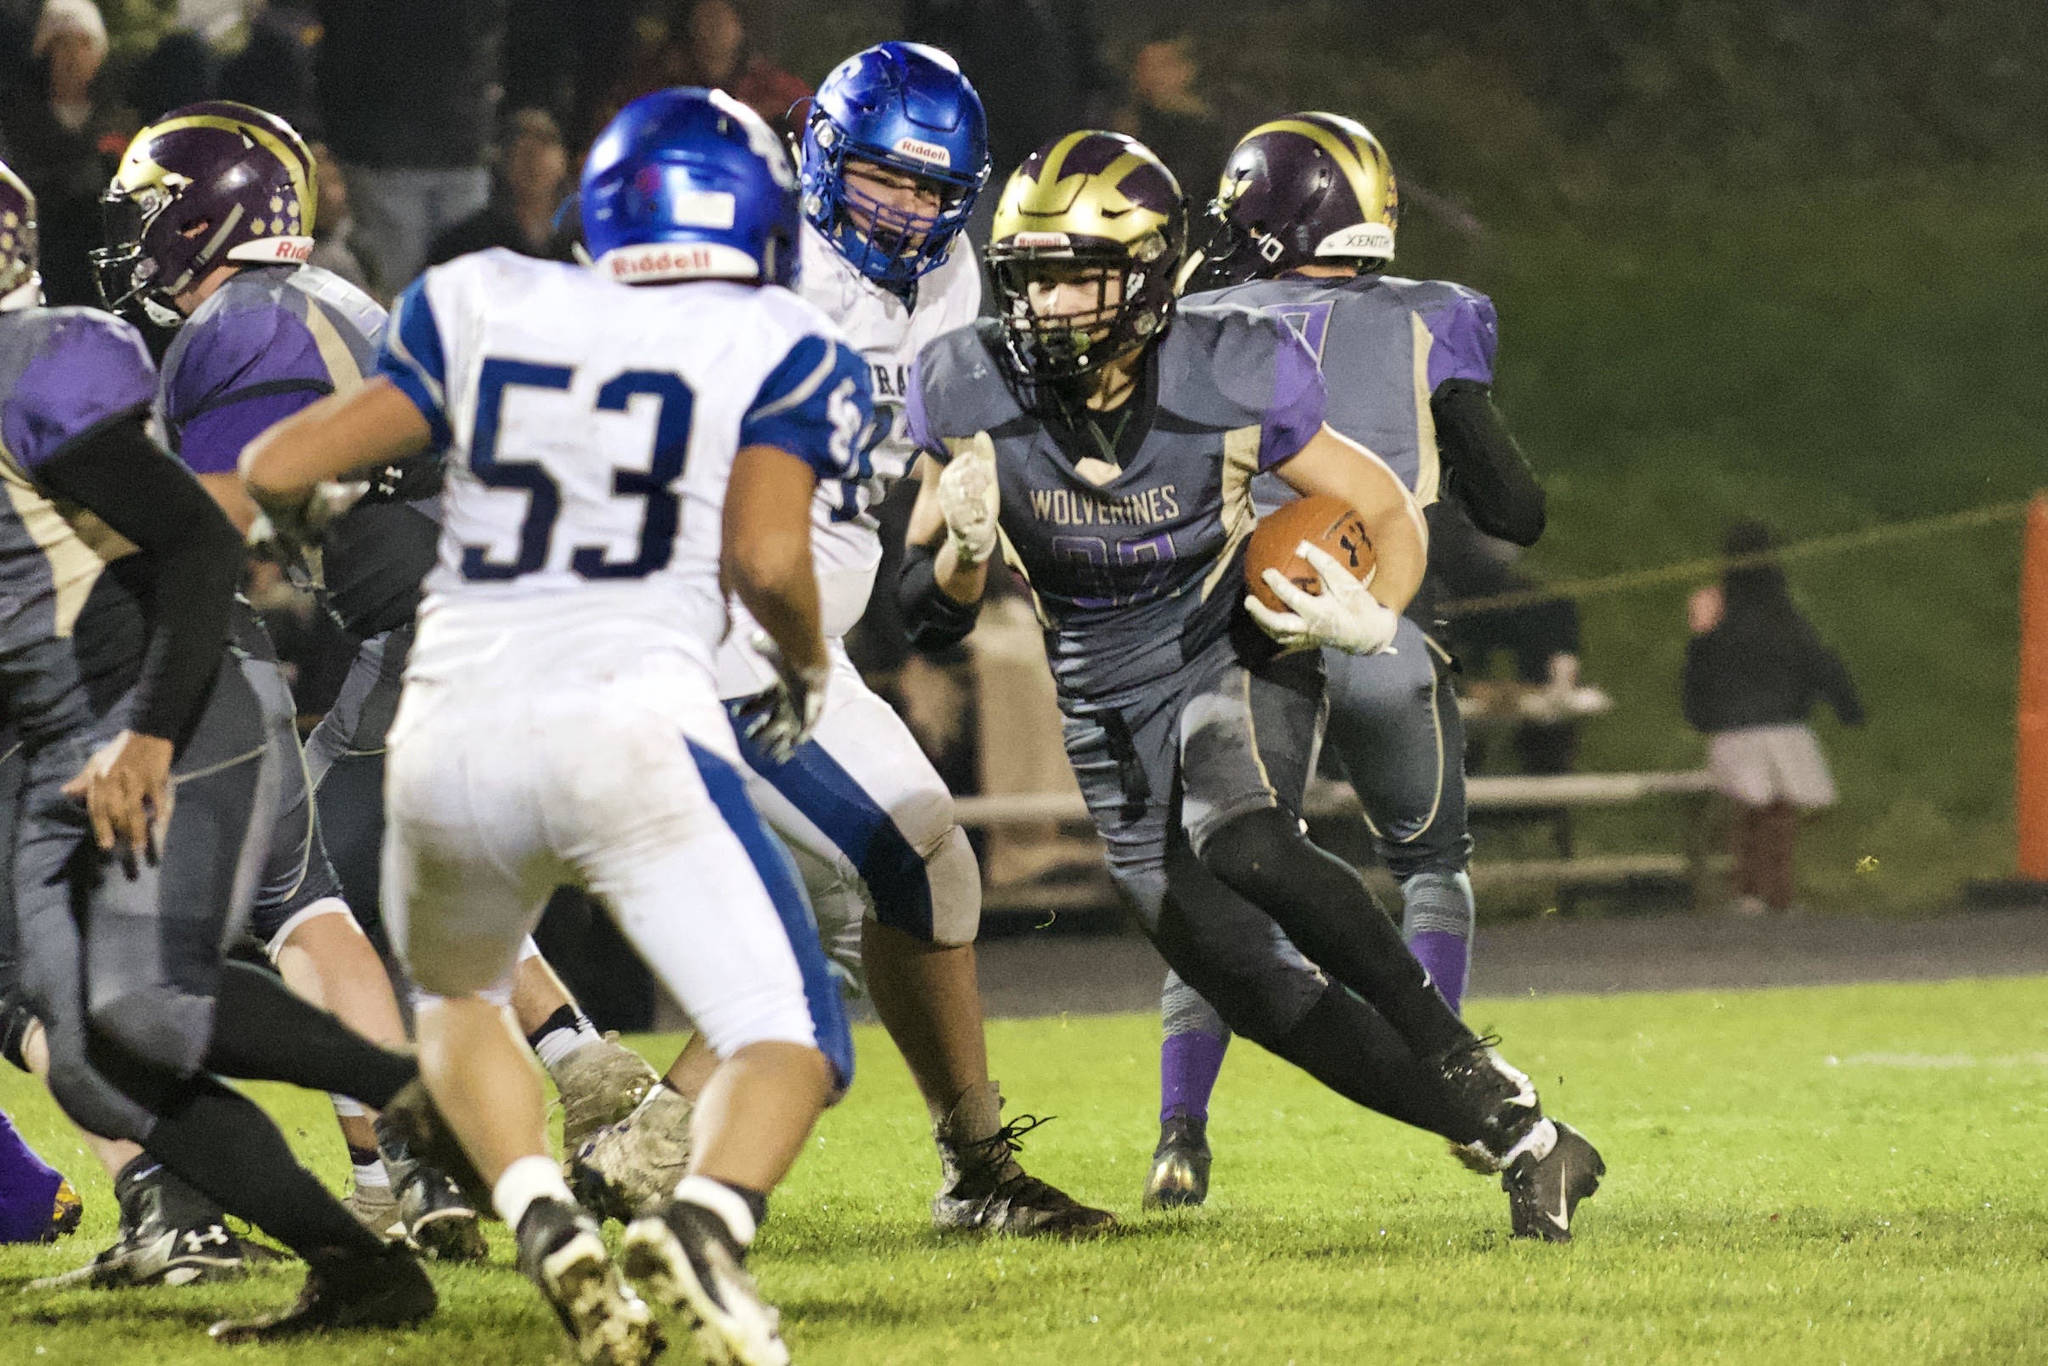 Kaden Ritchie, No. 32, is on the run for another big yardage gain. (John Stimpson/Contributed photo.)